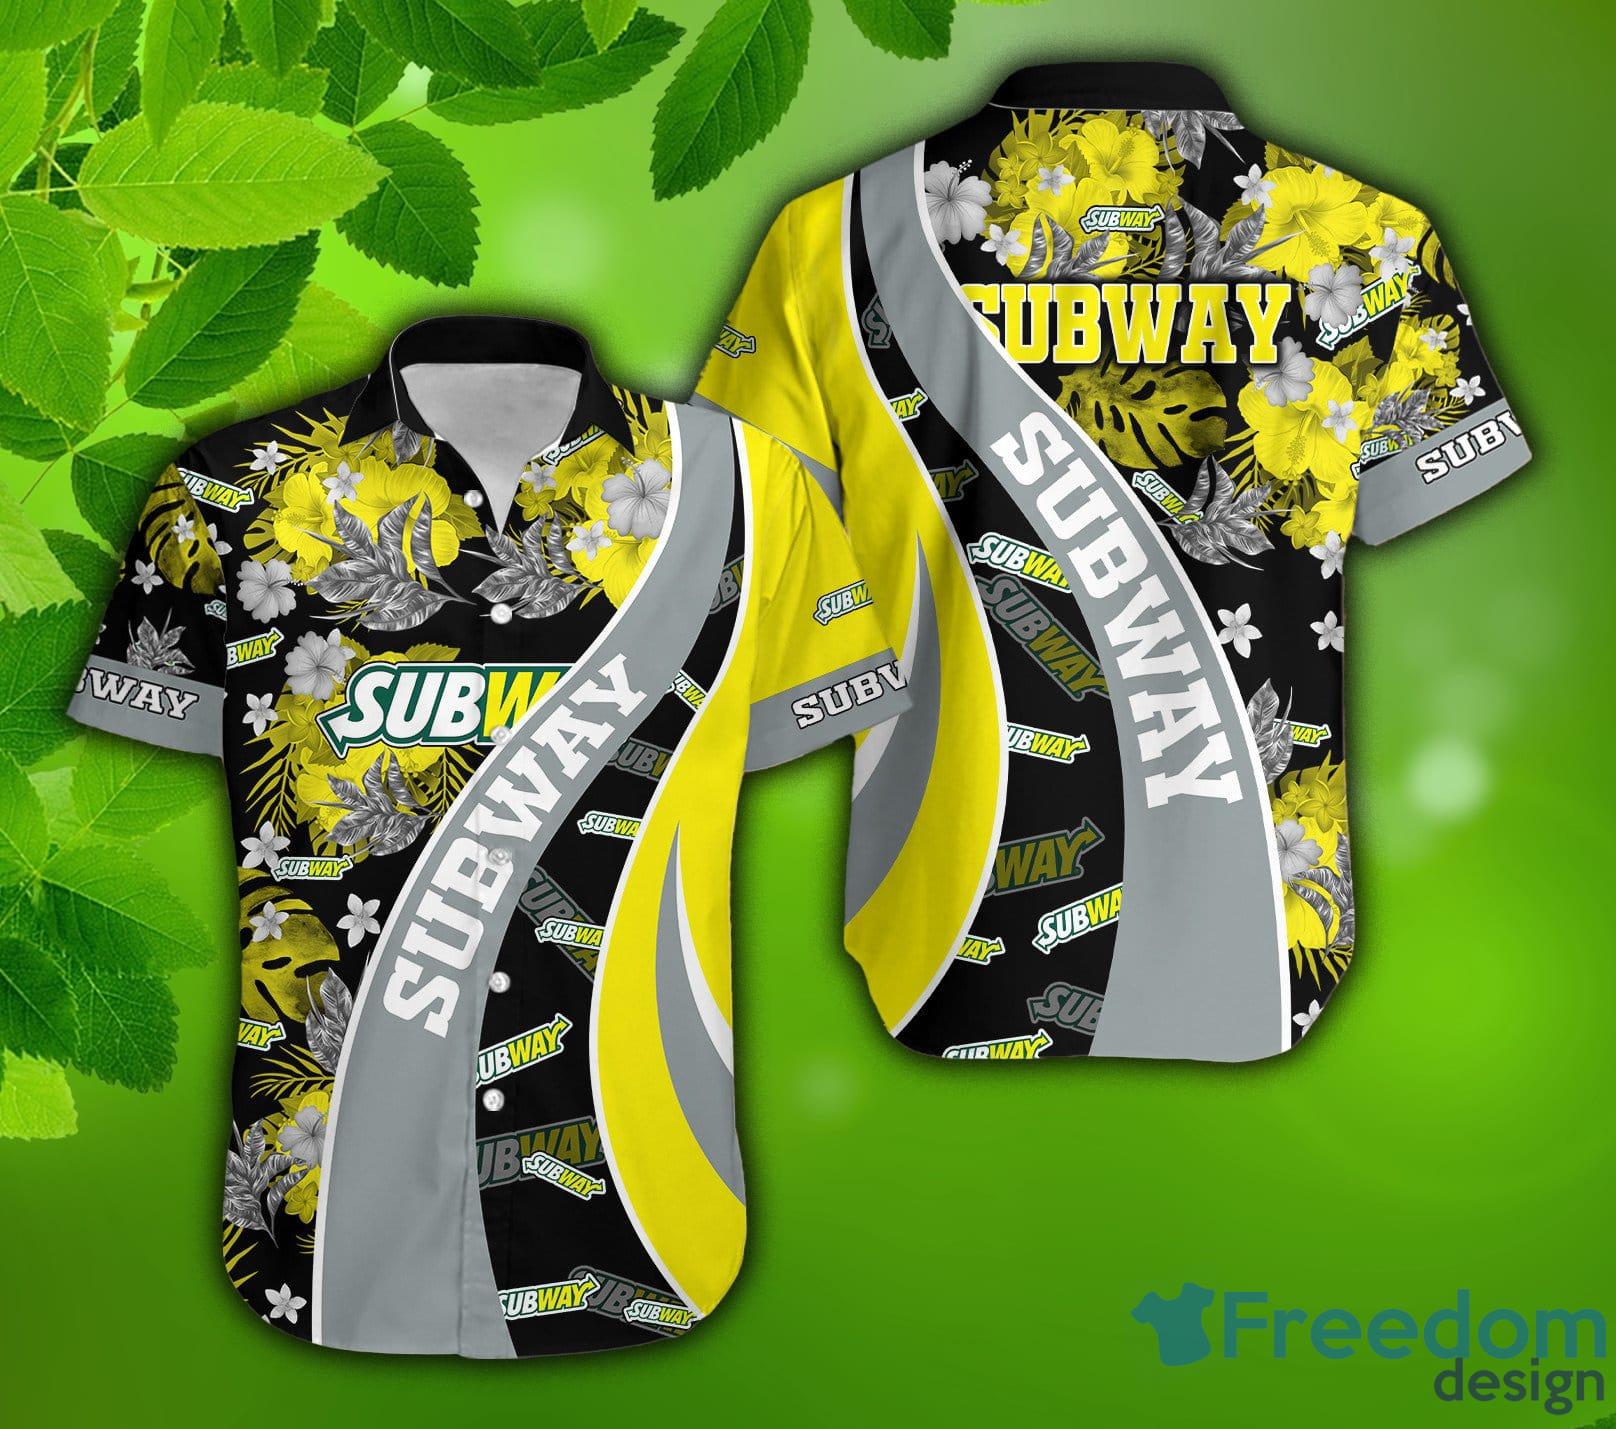 Custom Name 3D All Over Printed Subway 3D T-Shirt For Men And Women